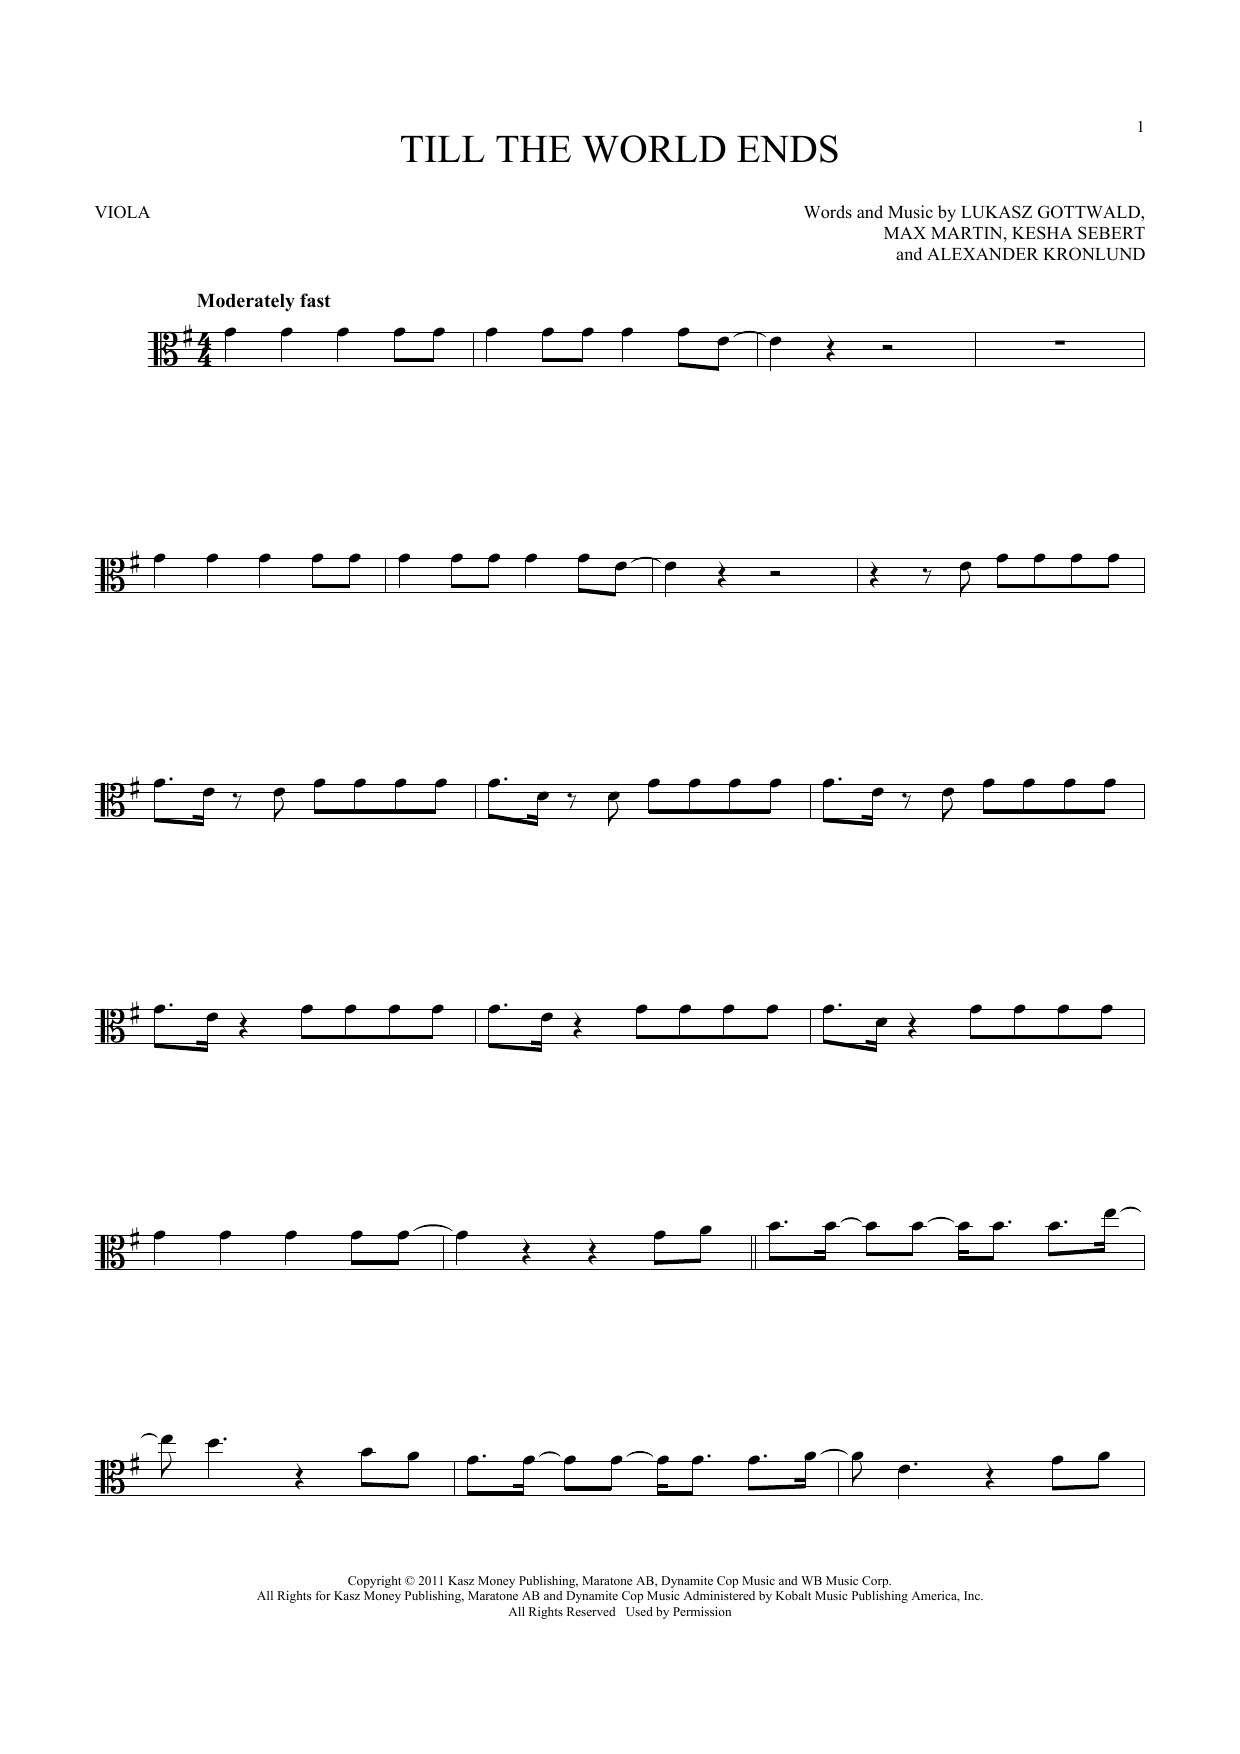 Download Britney Spears Till The World Ends Sheet Music